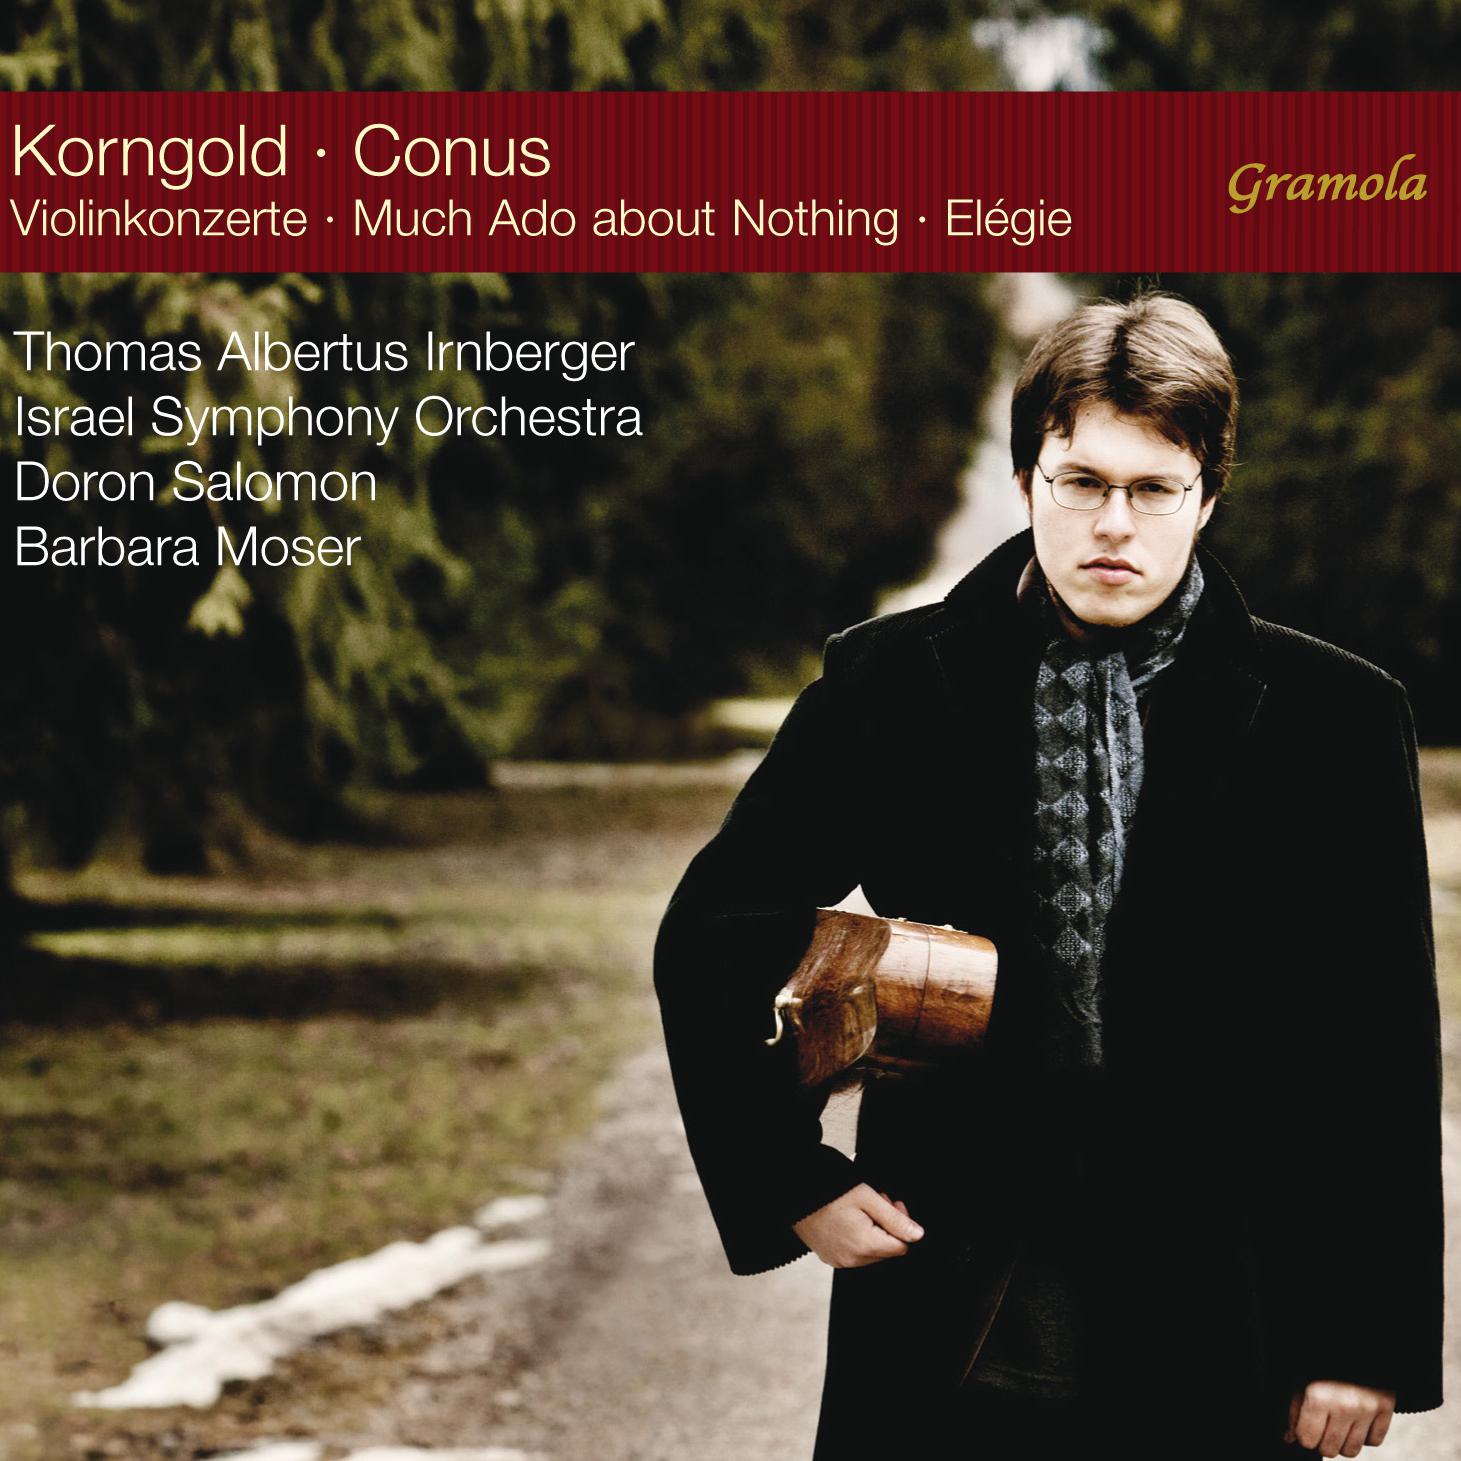 Korngold: Violin Concertos  Conus: Much Ado About Nothing É le gie